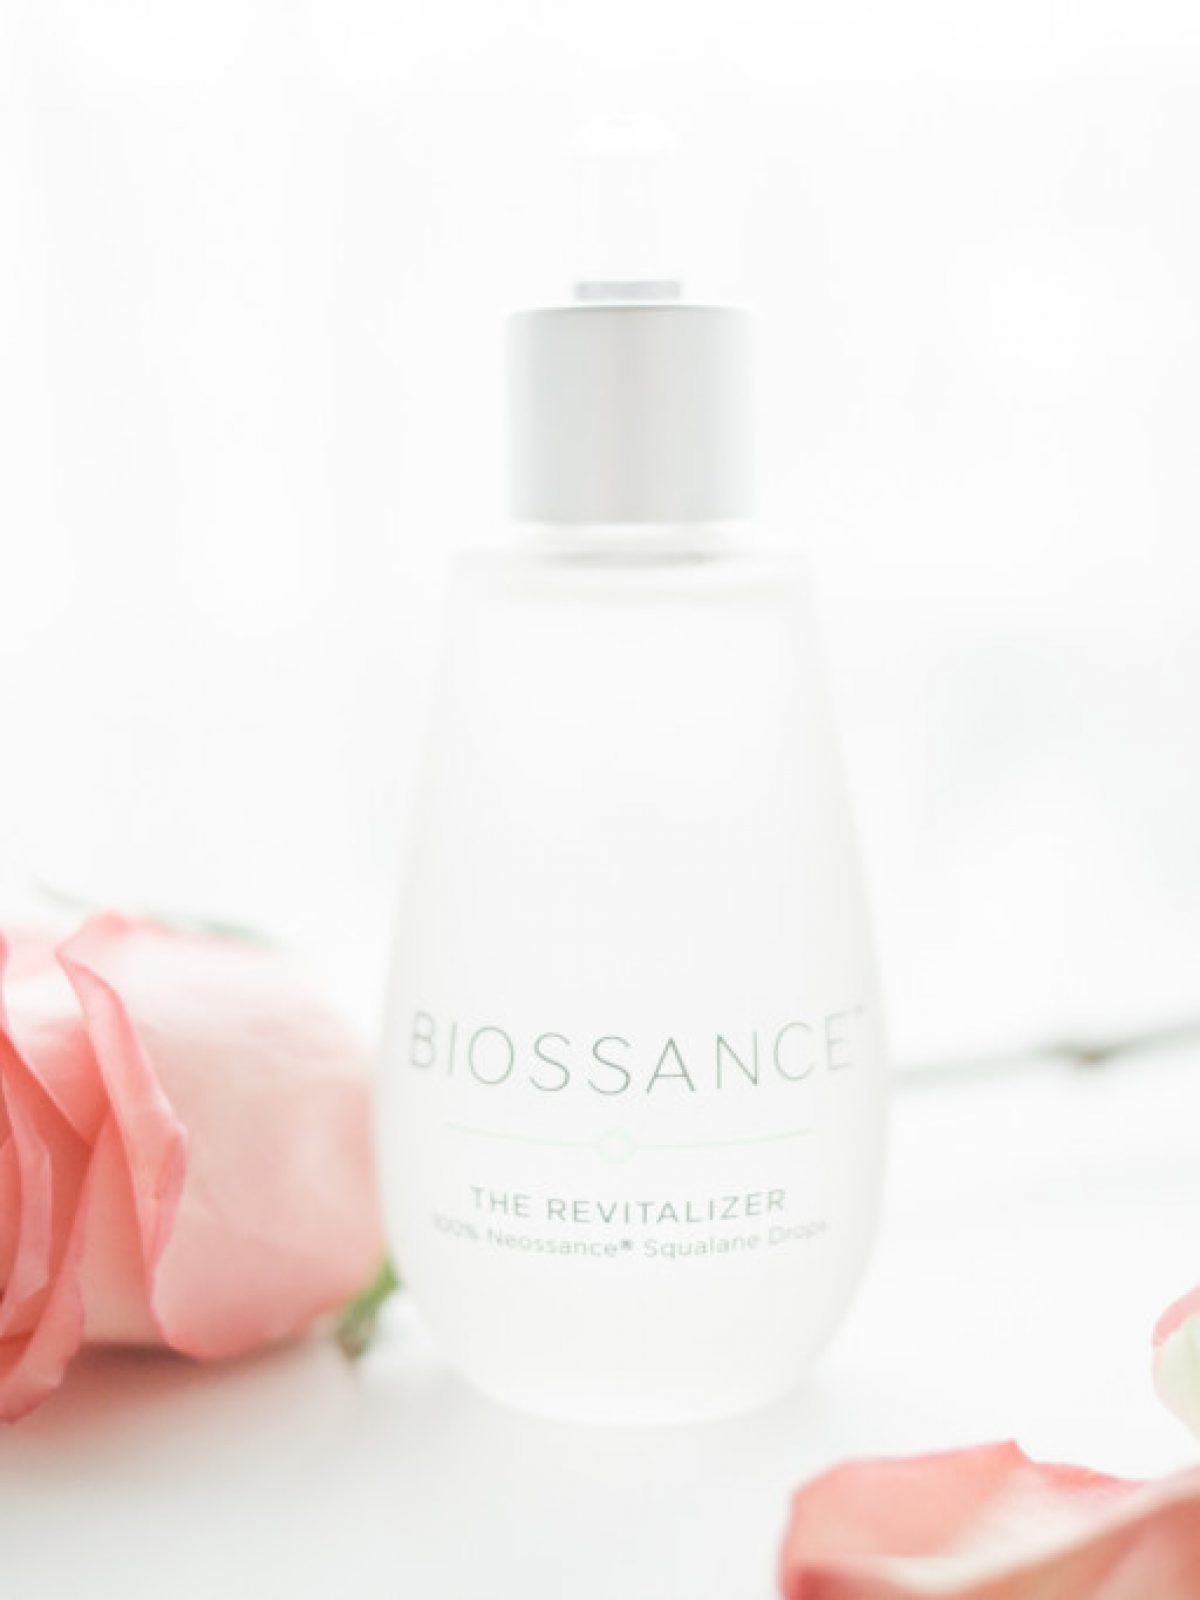 Biossance review, how to keep your skin hydrated, hydrating skin booster, how to hydrate your skin, skin hydrating beauty product